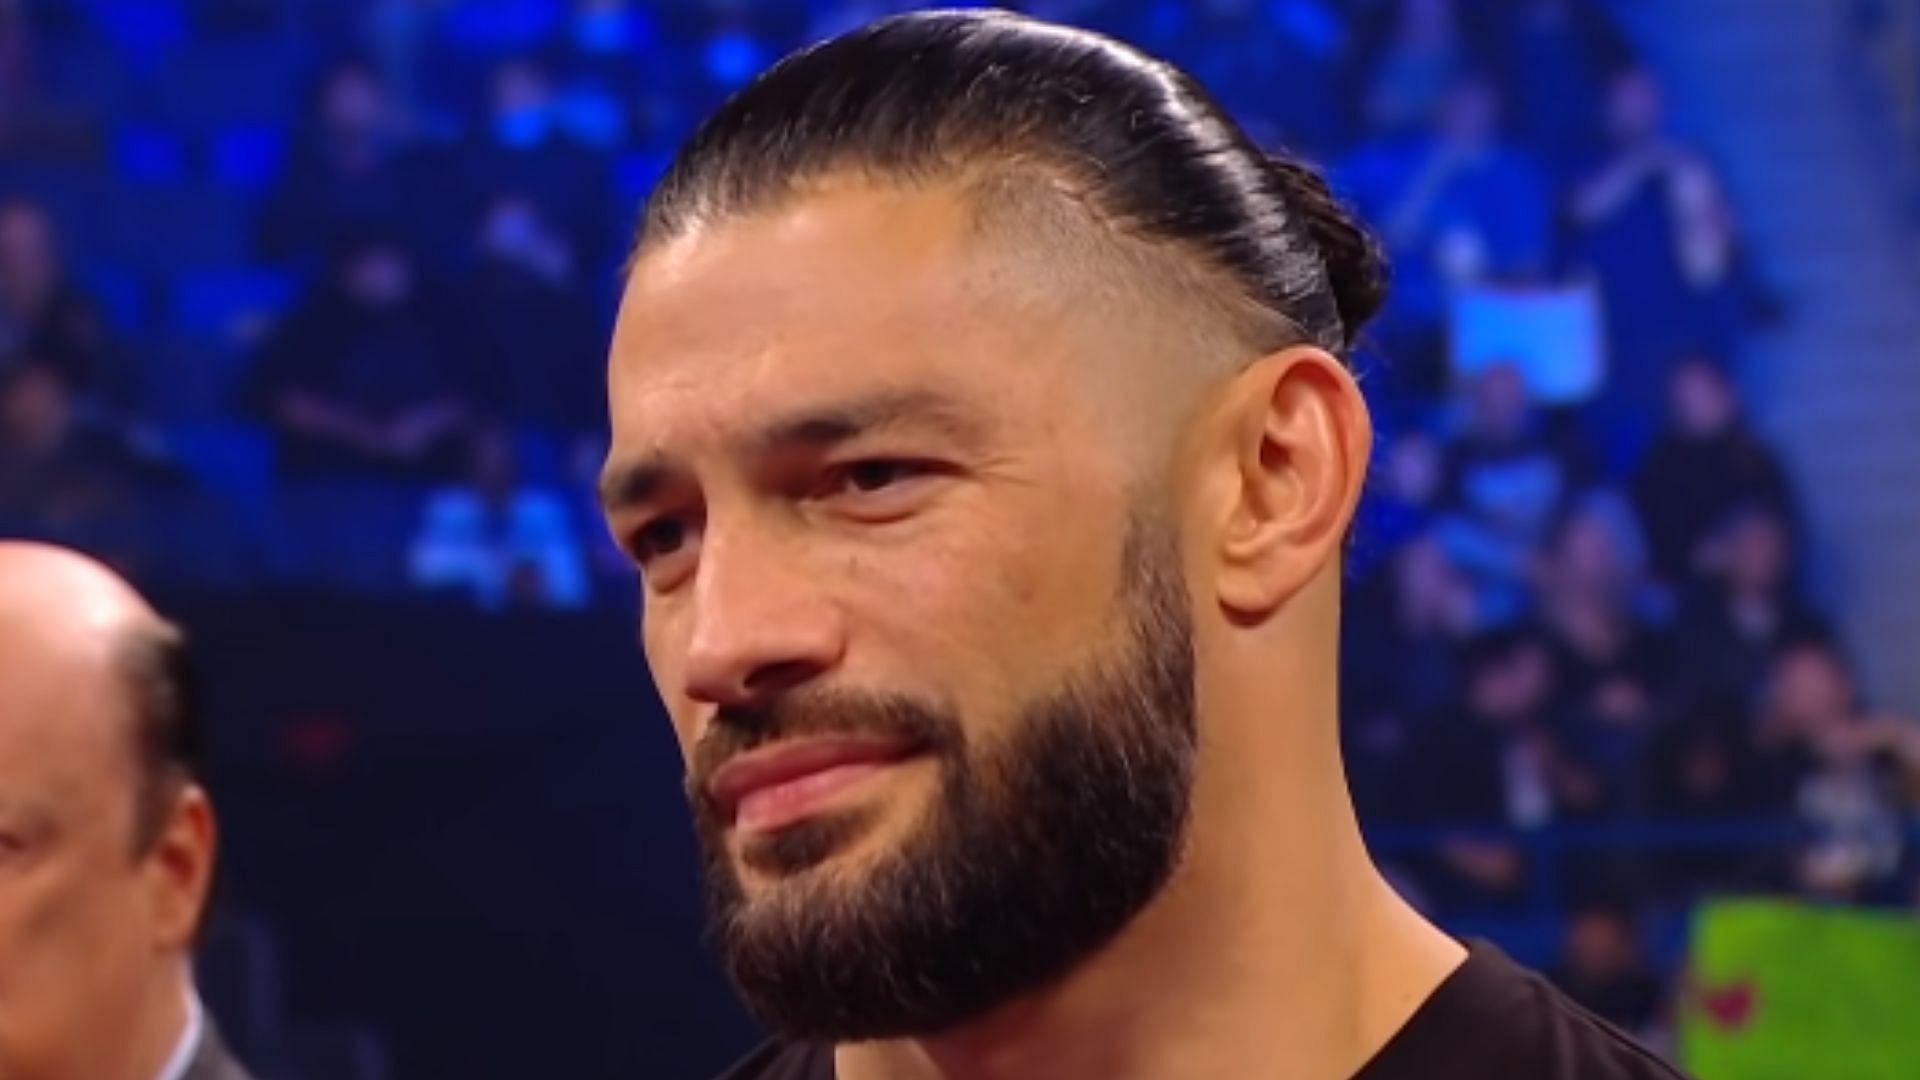 Roman Reigns is currently feuding with Brock Lesnar